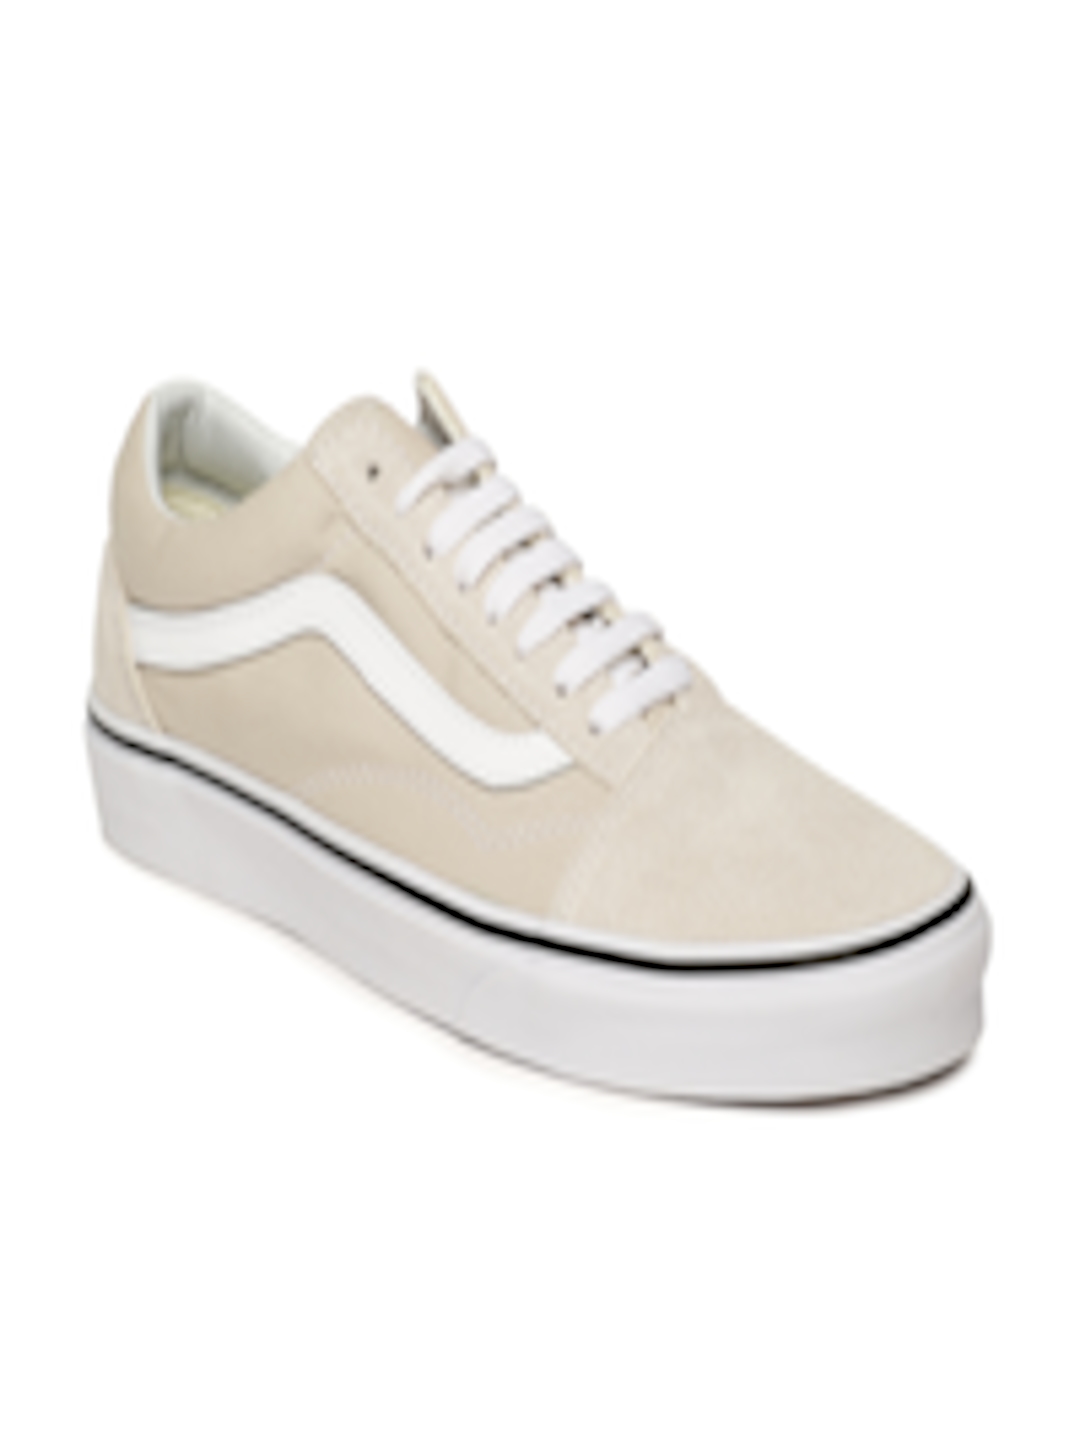 Buy Vans Unisex Off White Lace Up Sneakers - Casual Shoes for Unisex ...